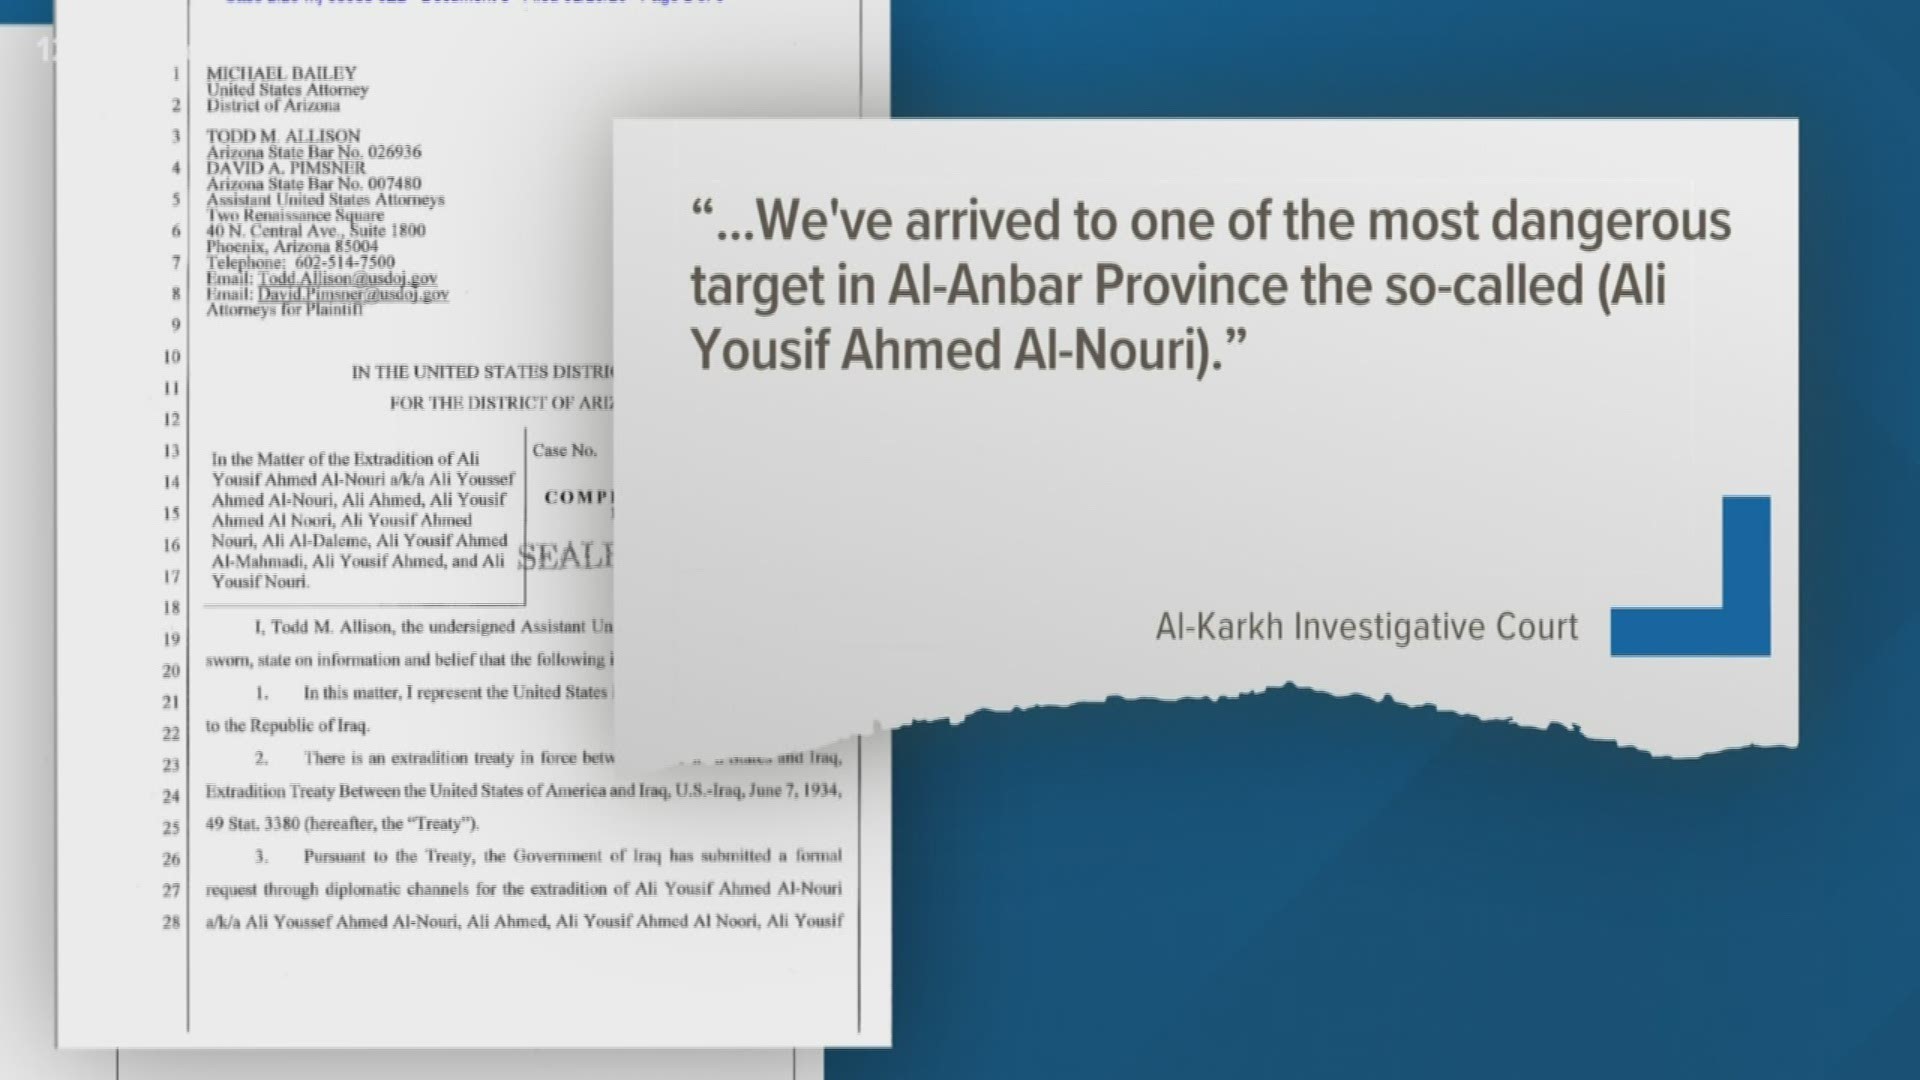 A Phoenix man, who has been arrested, is accused of being a member of Al-Qaeda. Ali Yousif Ahmed Al-Nouri has an extradition hearing Tuesday morning.